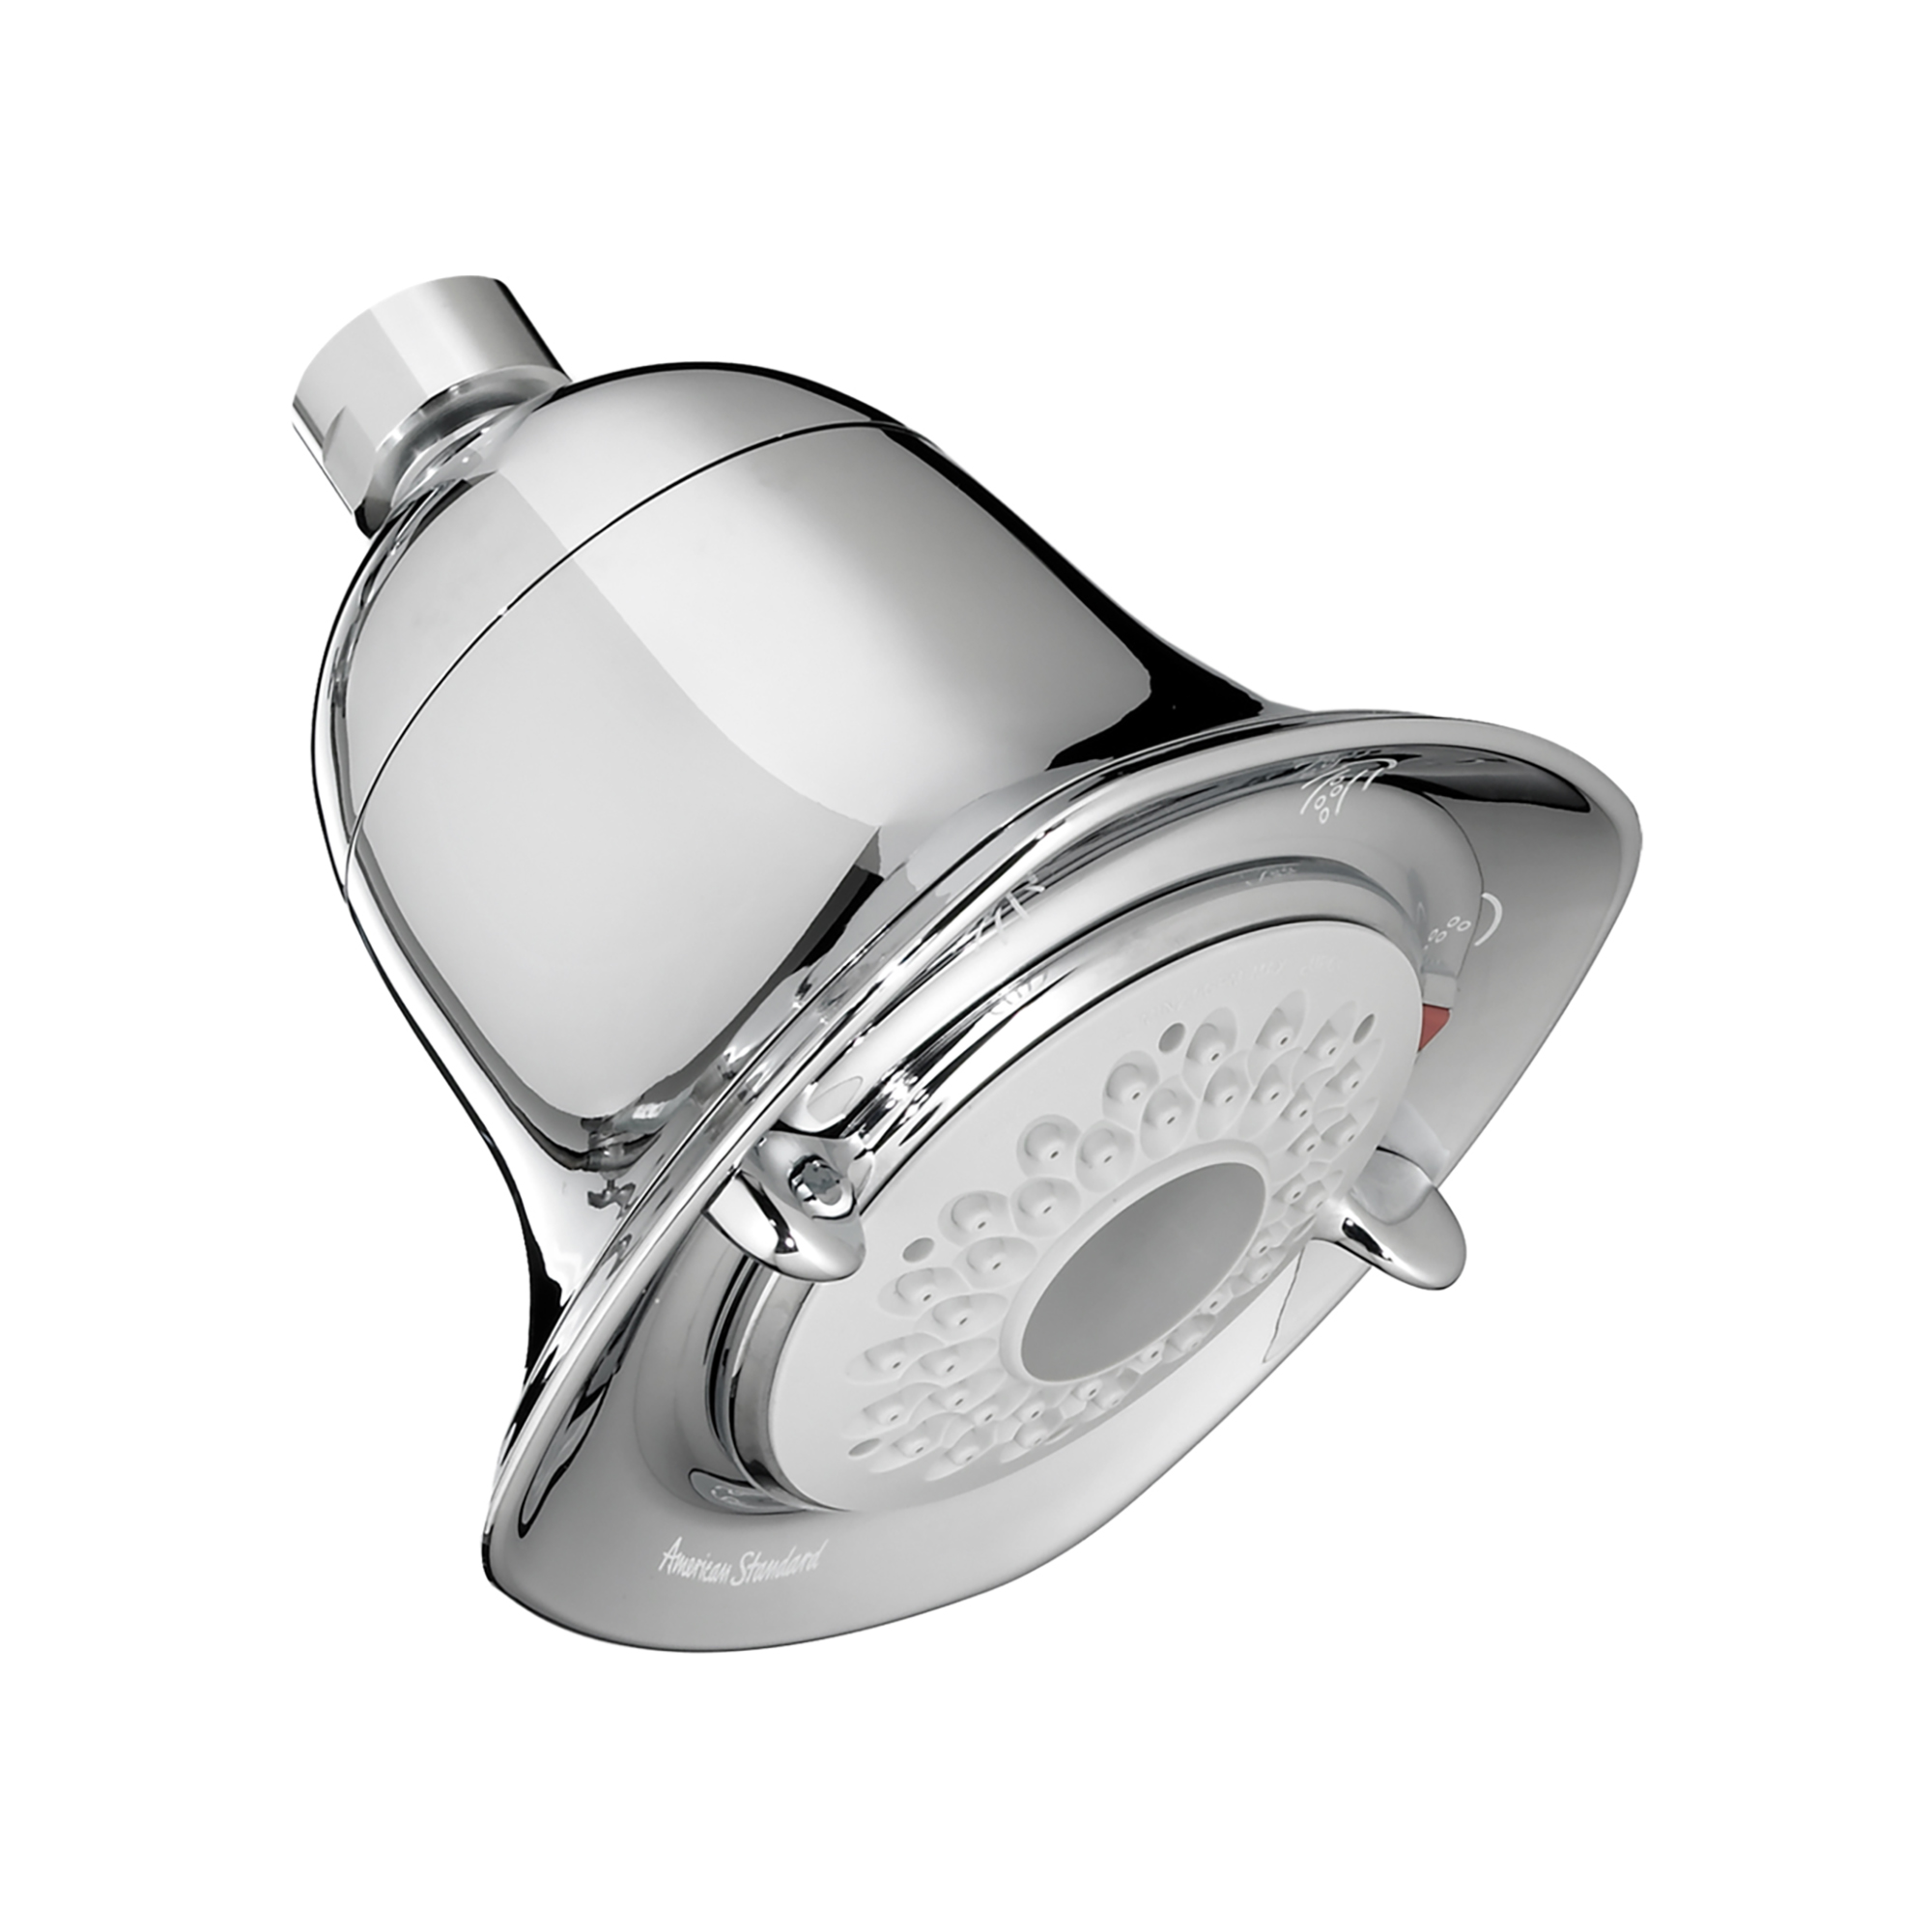 FloWise™ Square 2.0 gpm/7.6 L/min Water-Saving Fixed Showerhead